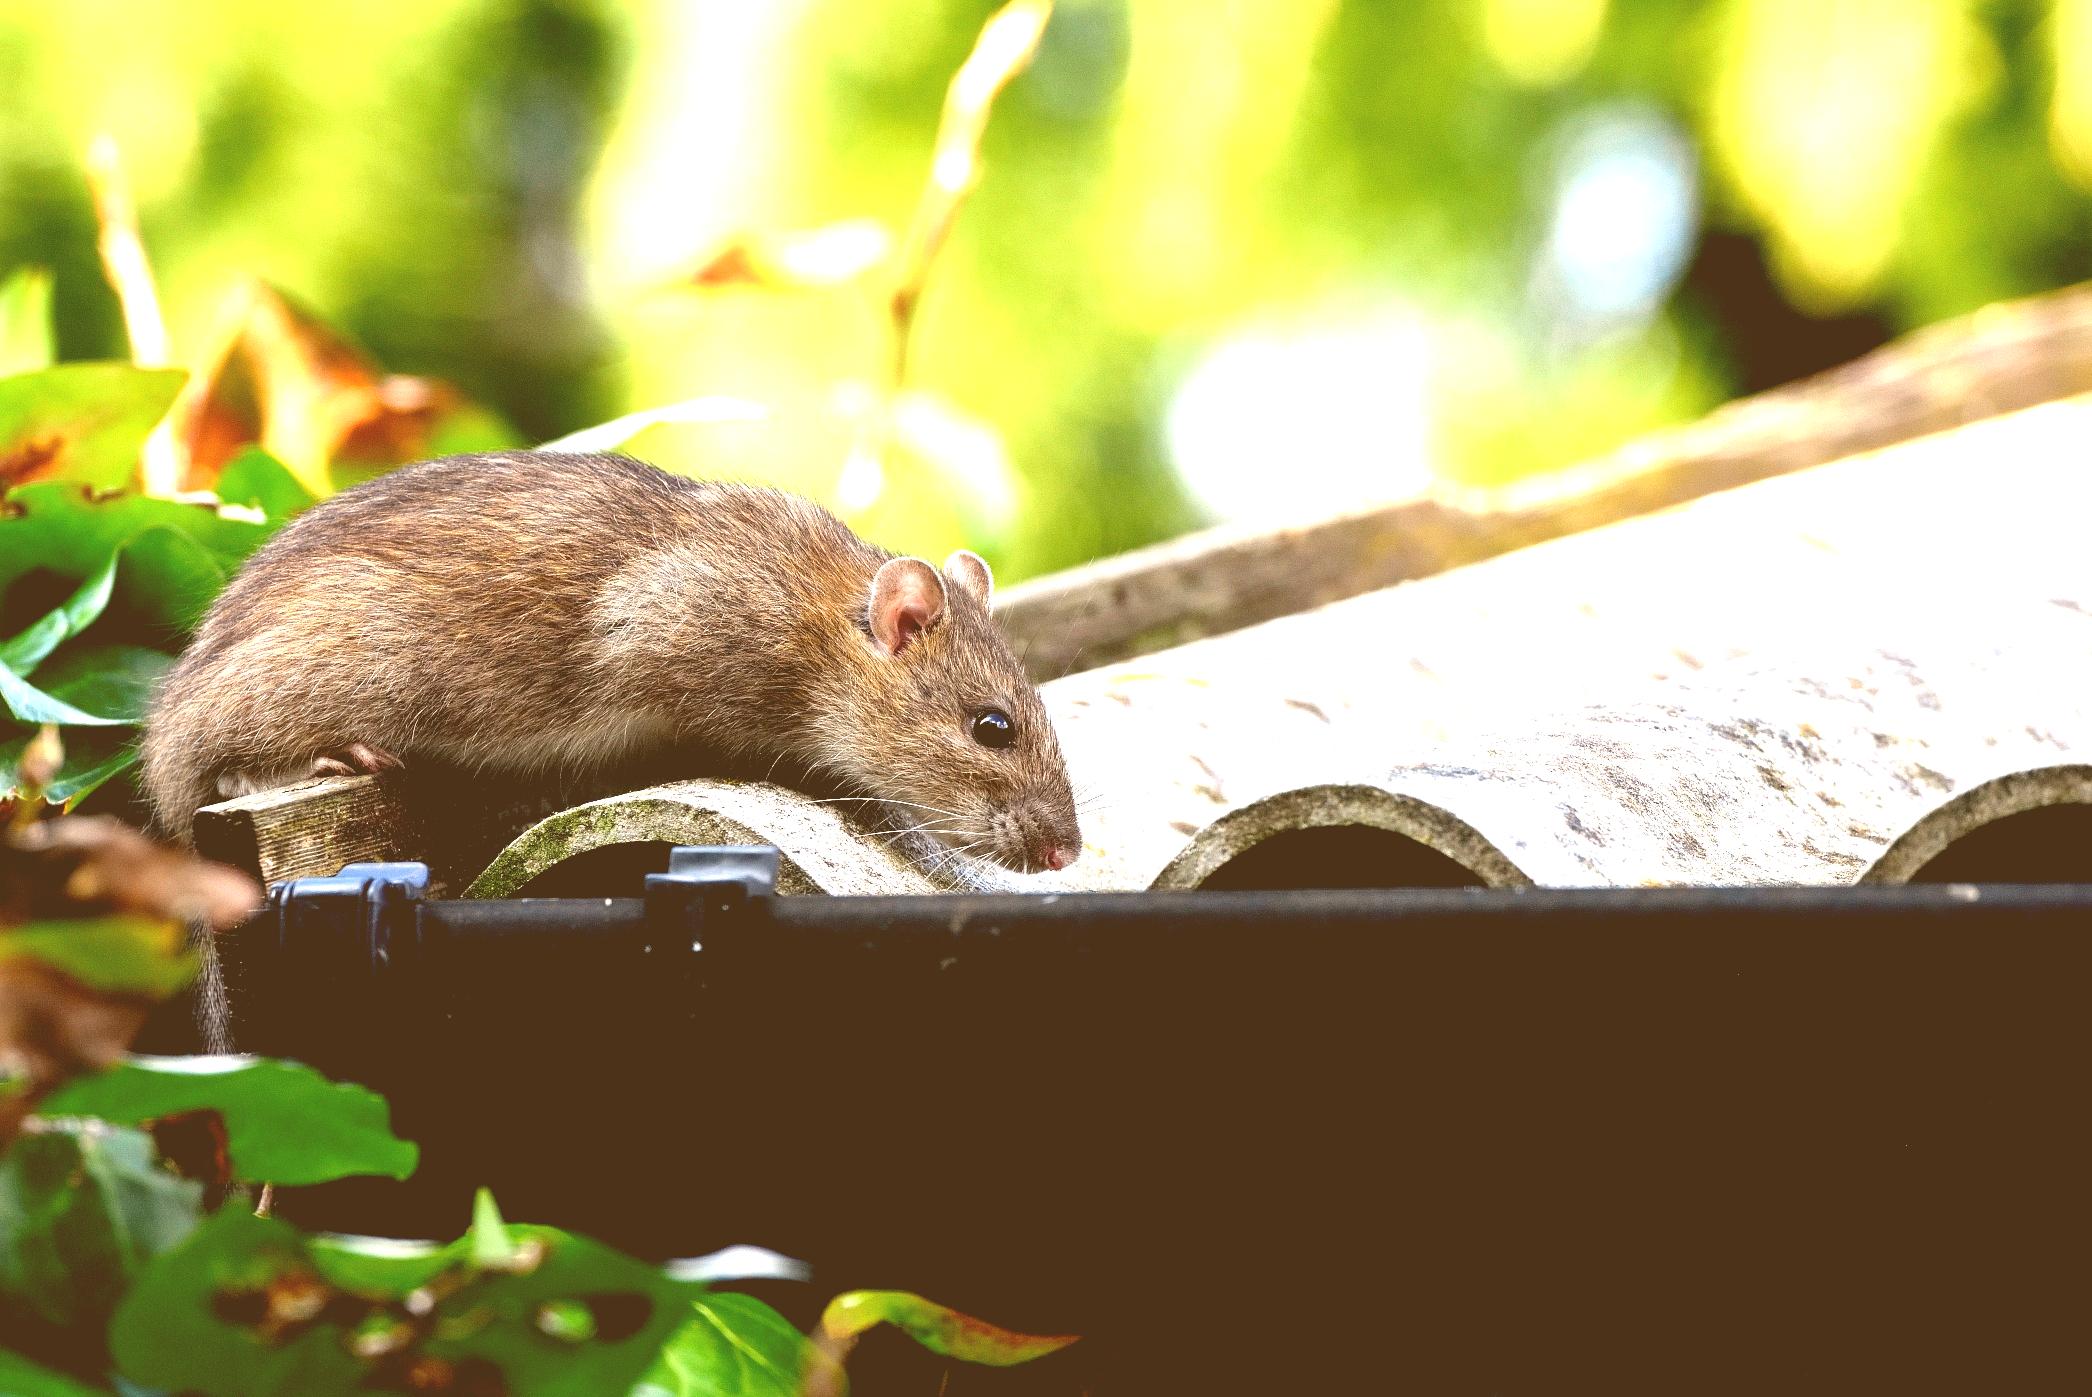 Prevention and control of rodent infestation in Atlanta